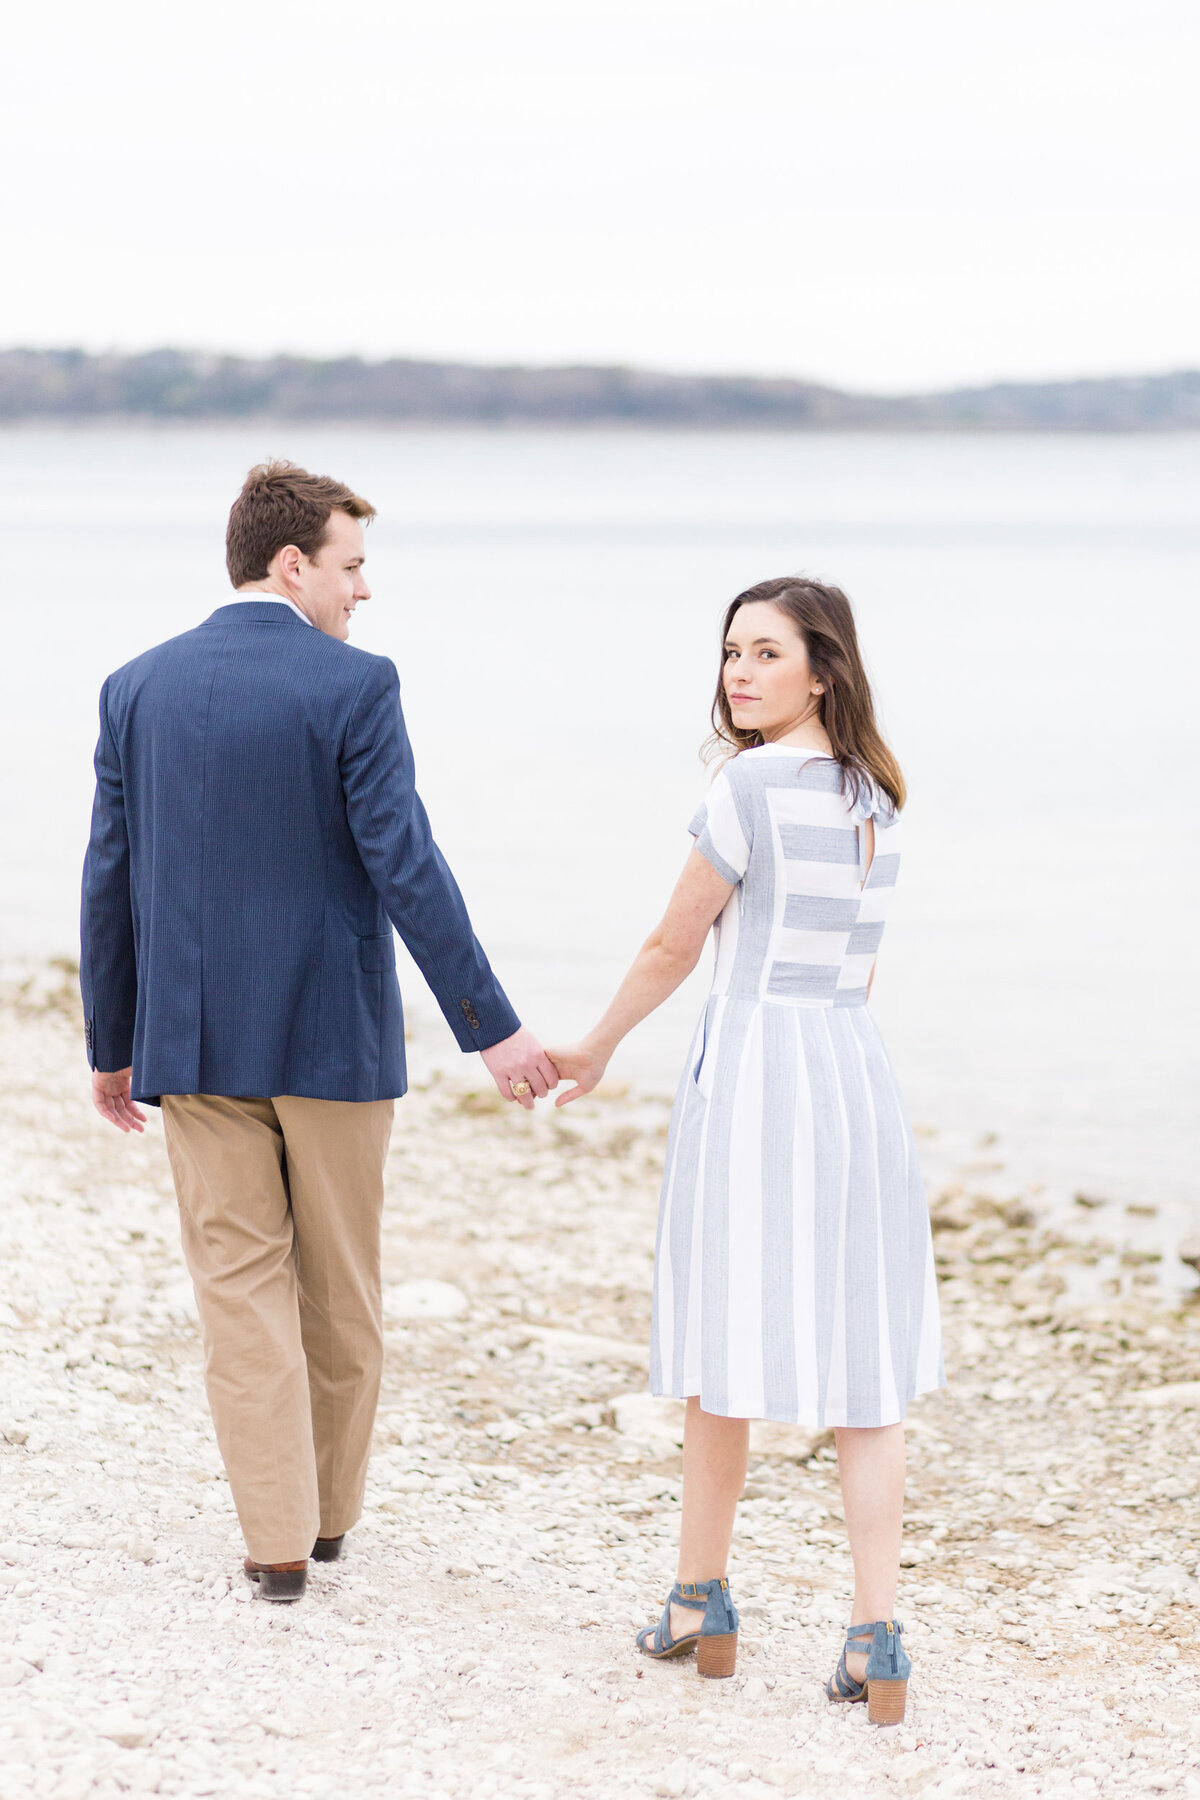 Jessica Chole Photography San Antonio Texas California Wedding Portrait Engagement Maternity Family Lifestyle Photographer Souther Cali TX CA Light Airy Bright Colorful Photography17